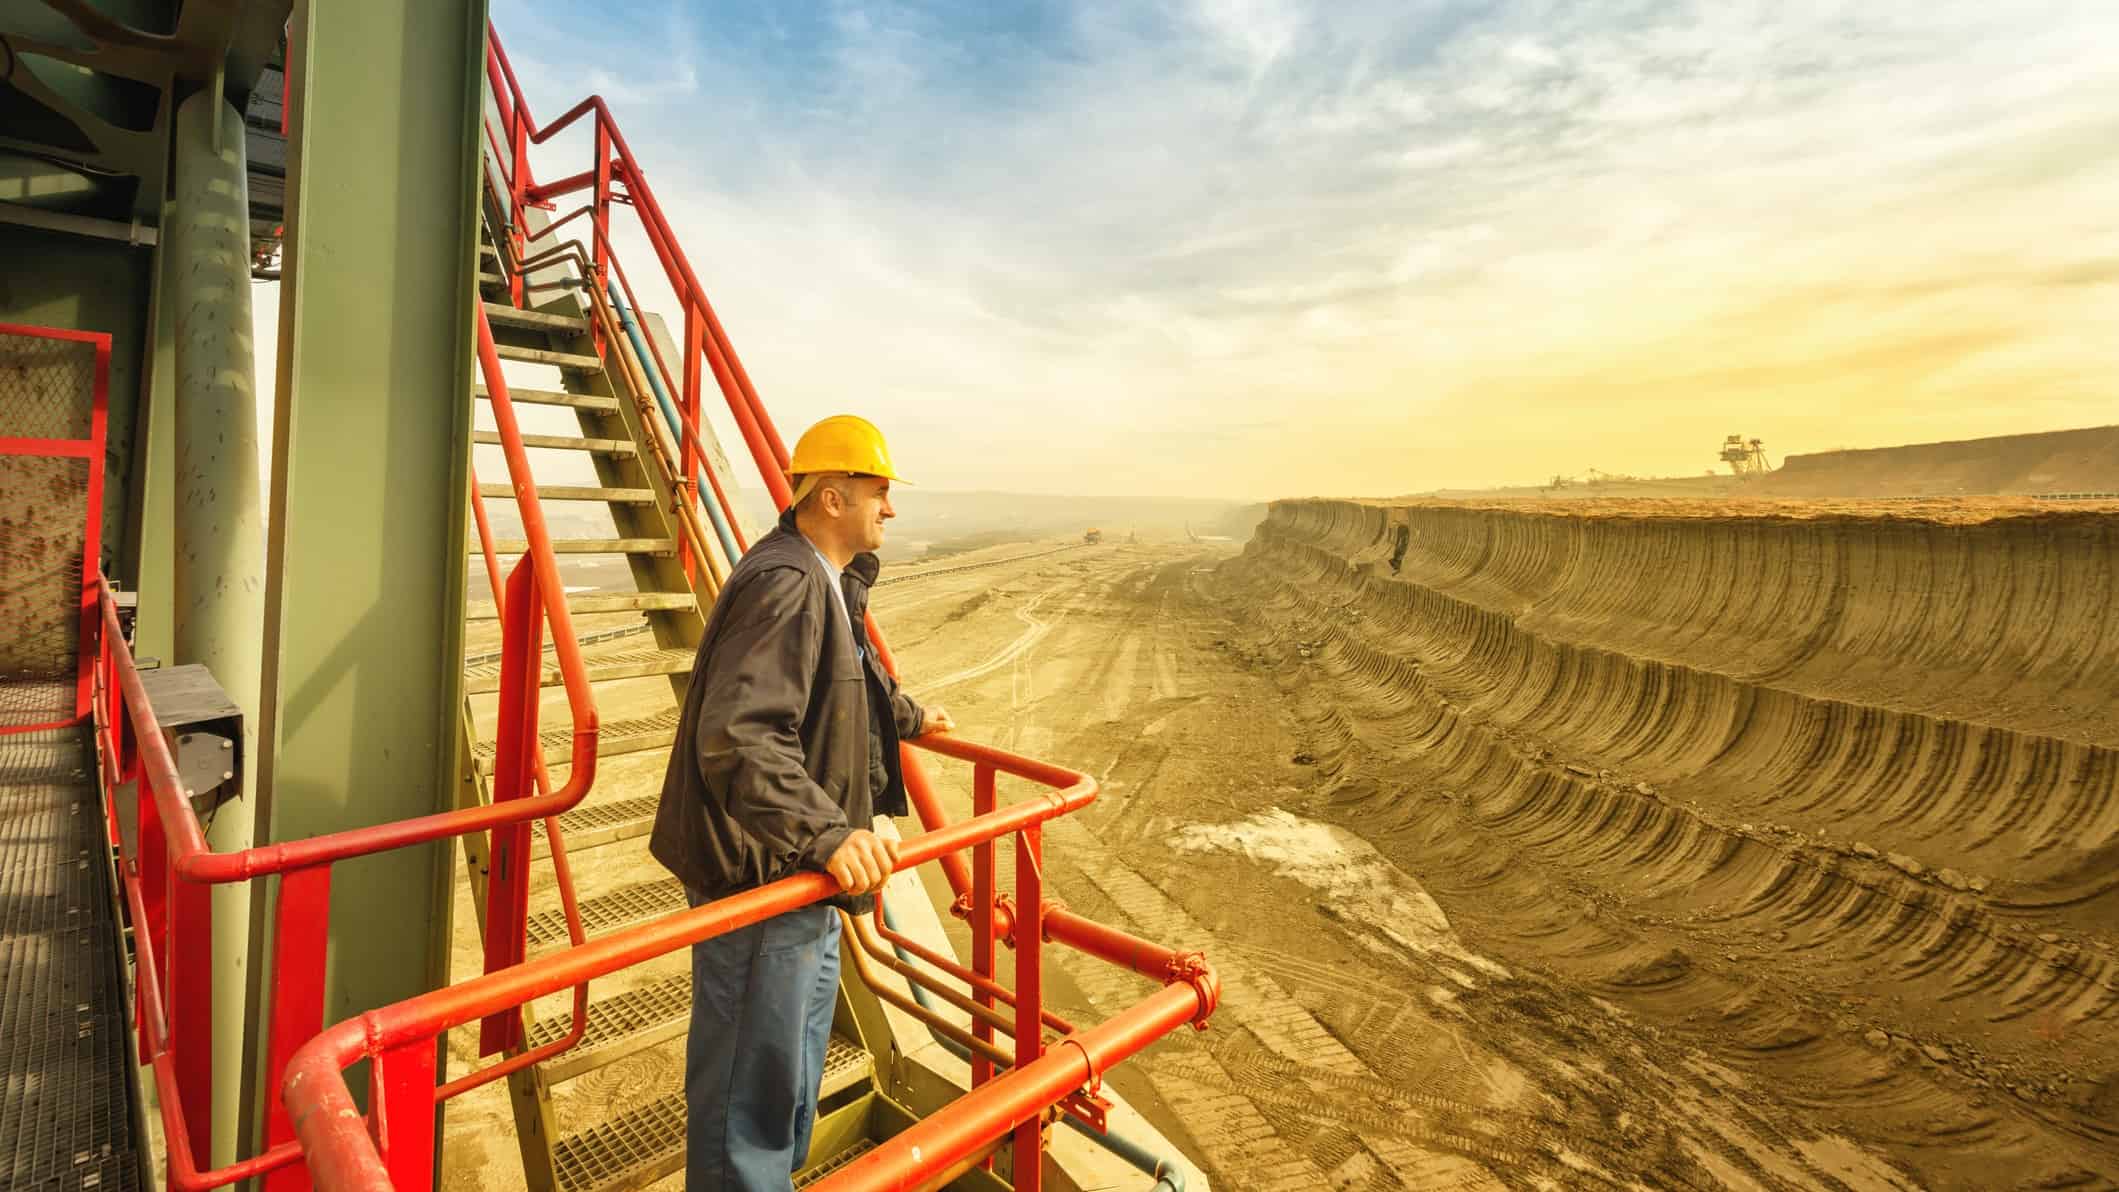 An engineer takes a break on a staircase and looks out over a huge open pit coal mine as the sun rises in the background